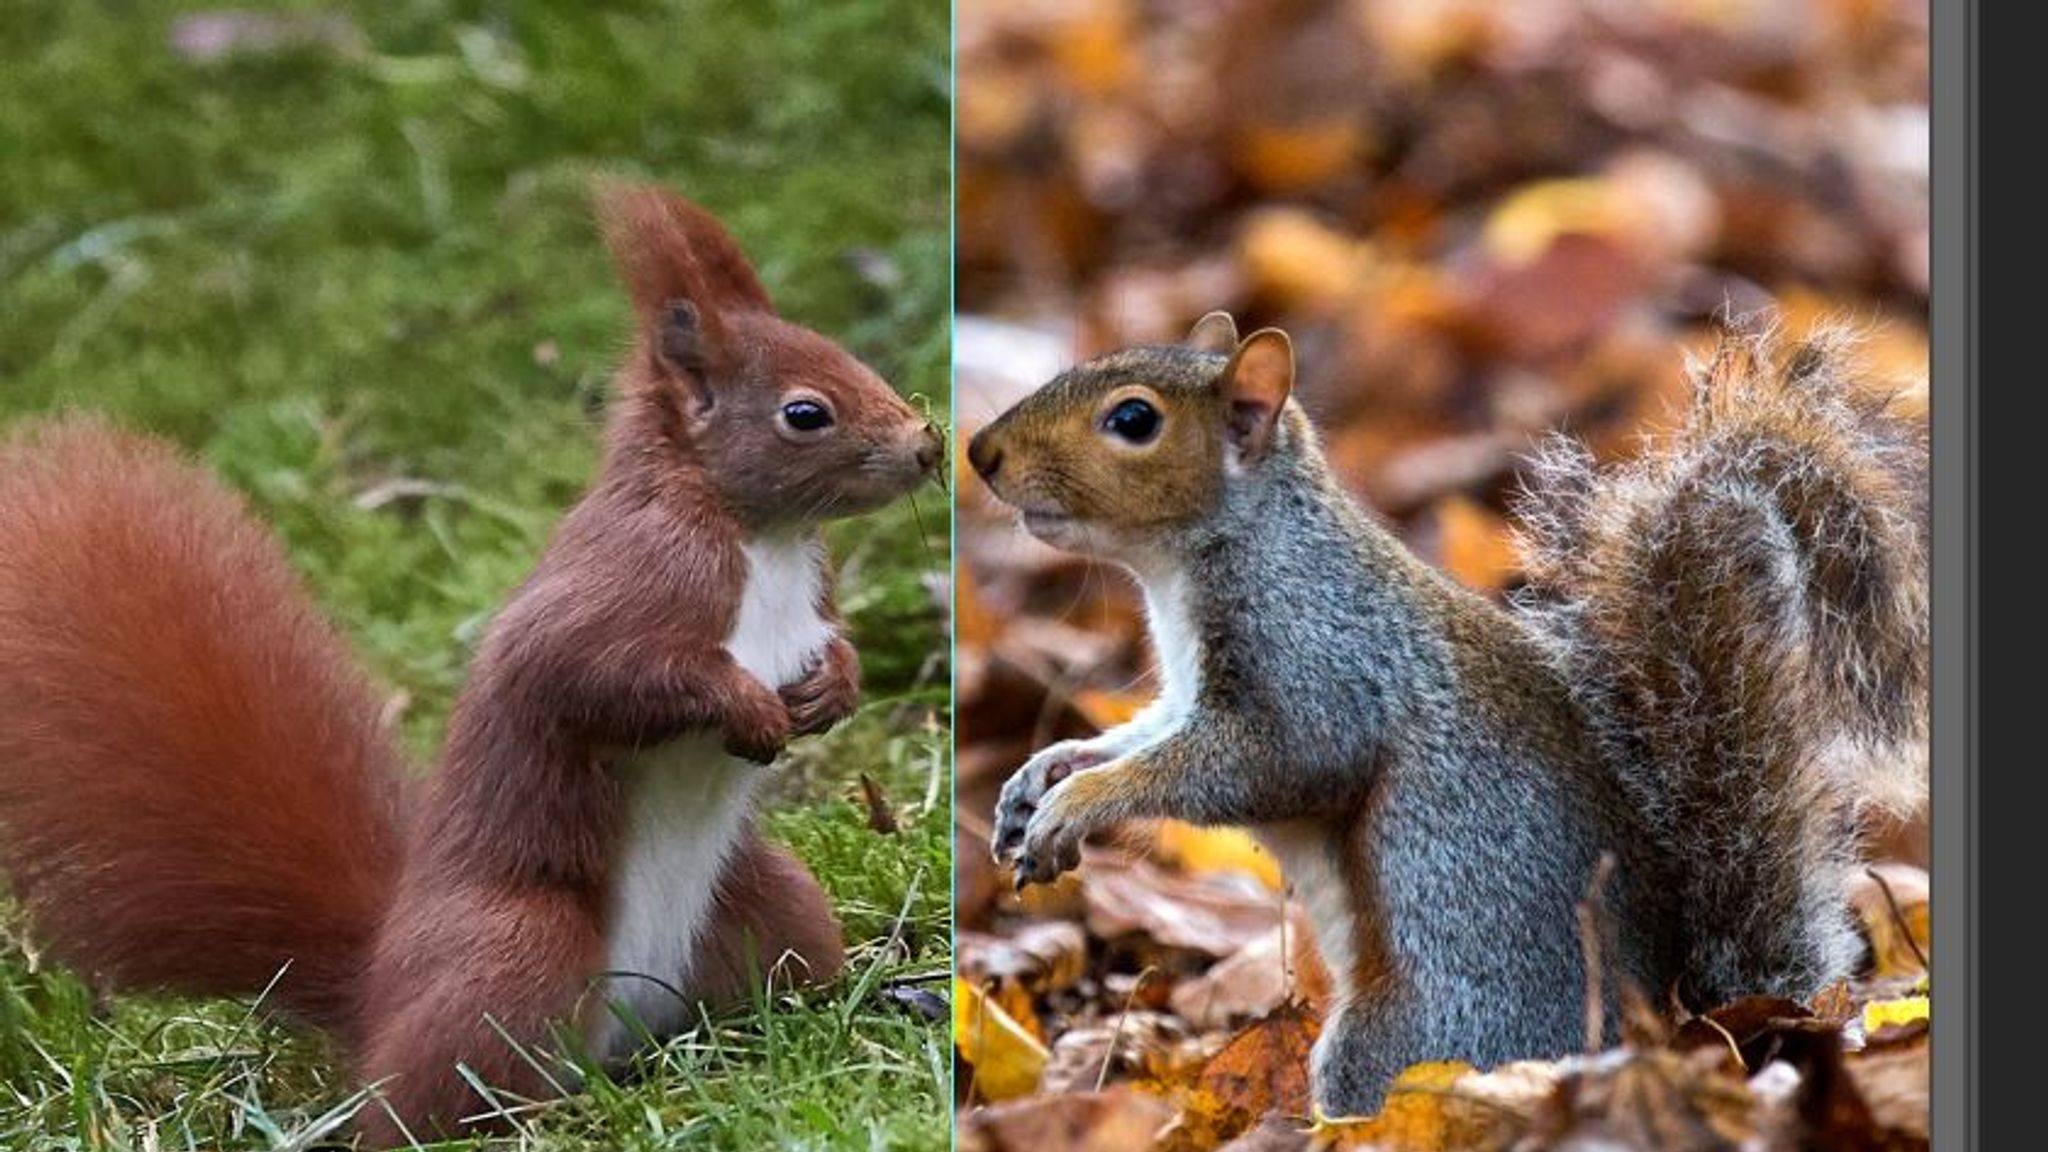 What is the difference between a red squirrel and a grey squirrel?